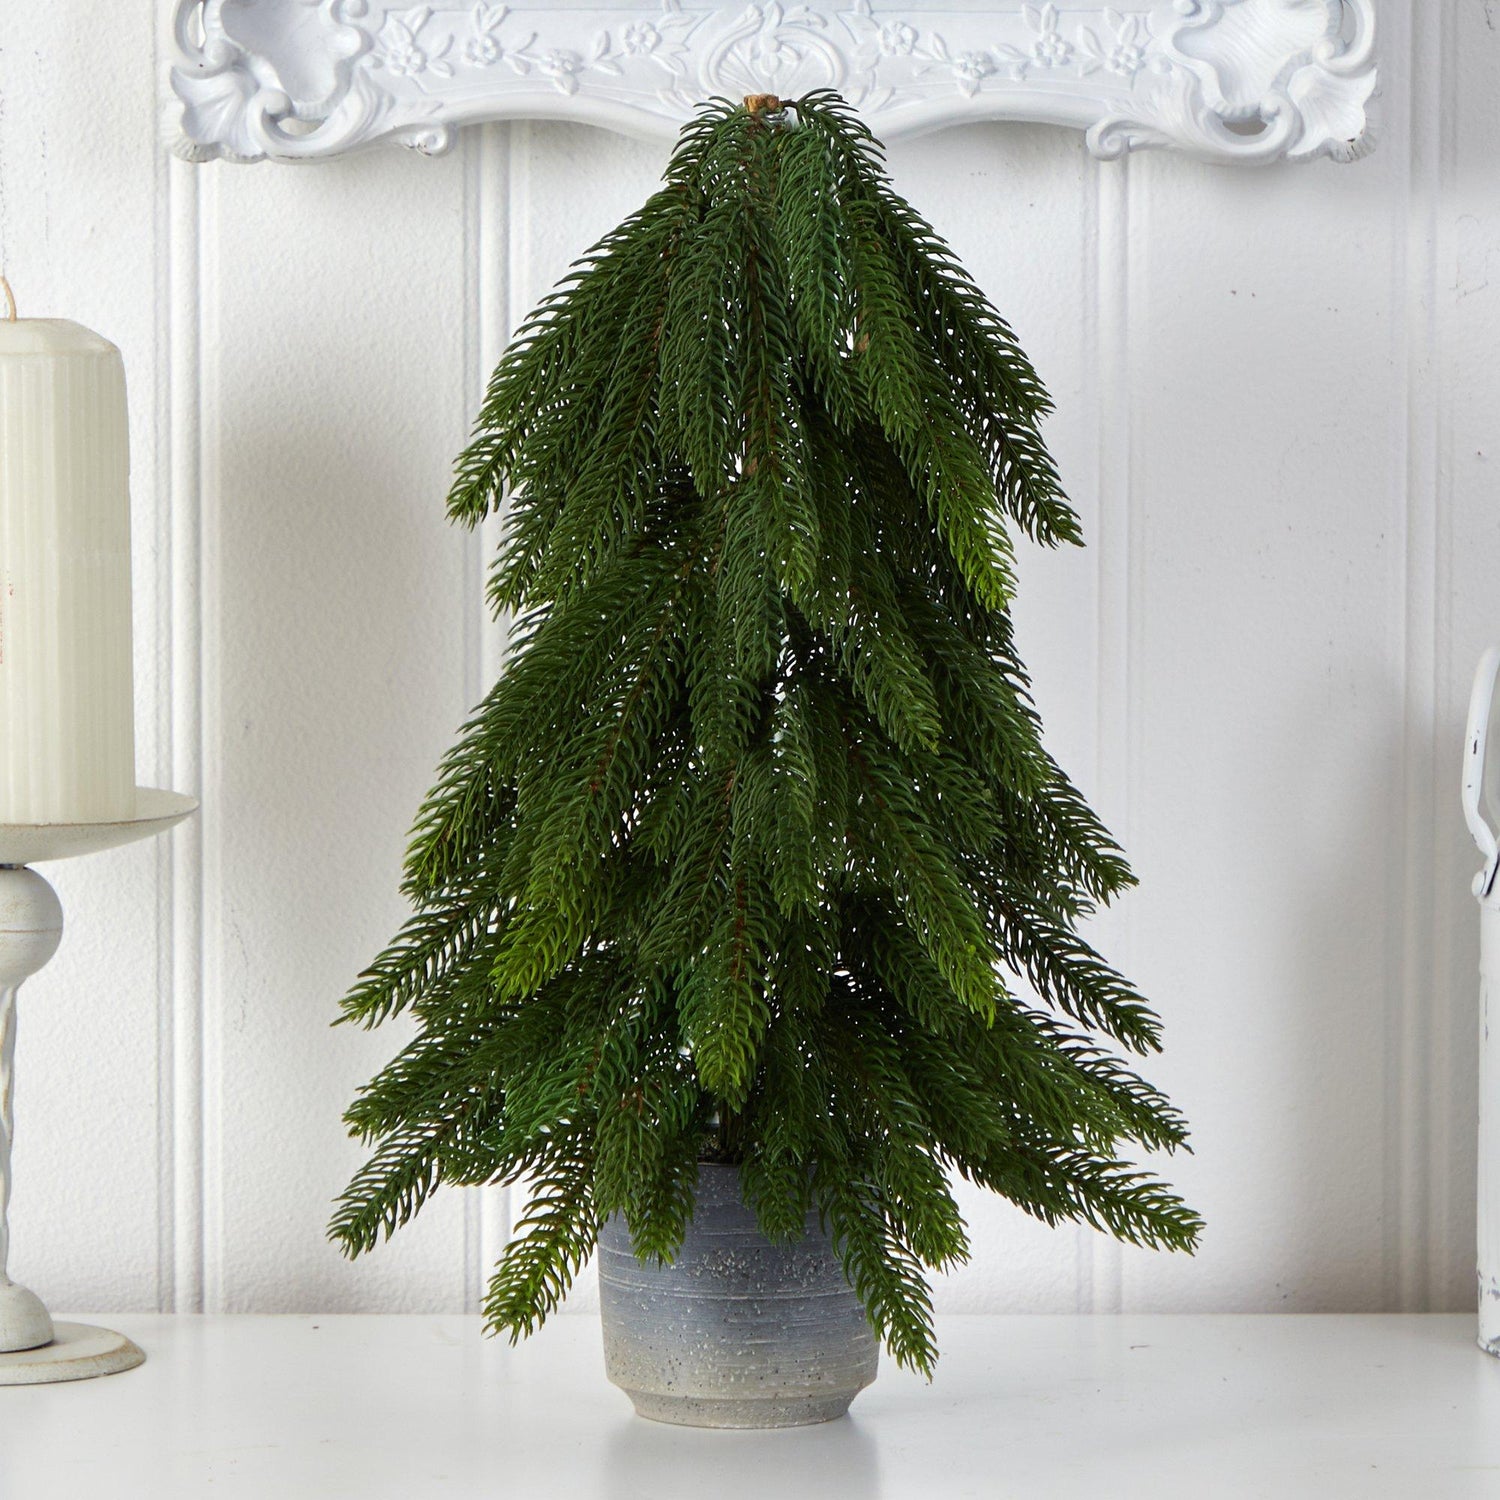 17” Pine Artificial Christmas Tree in Decorative Planter